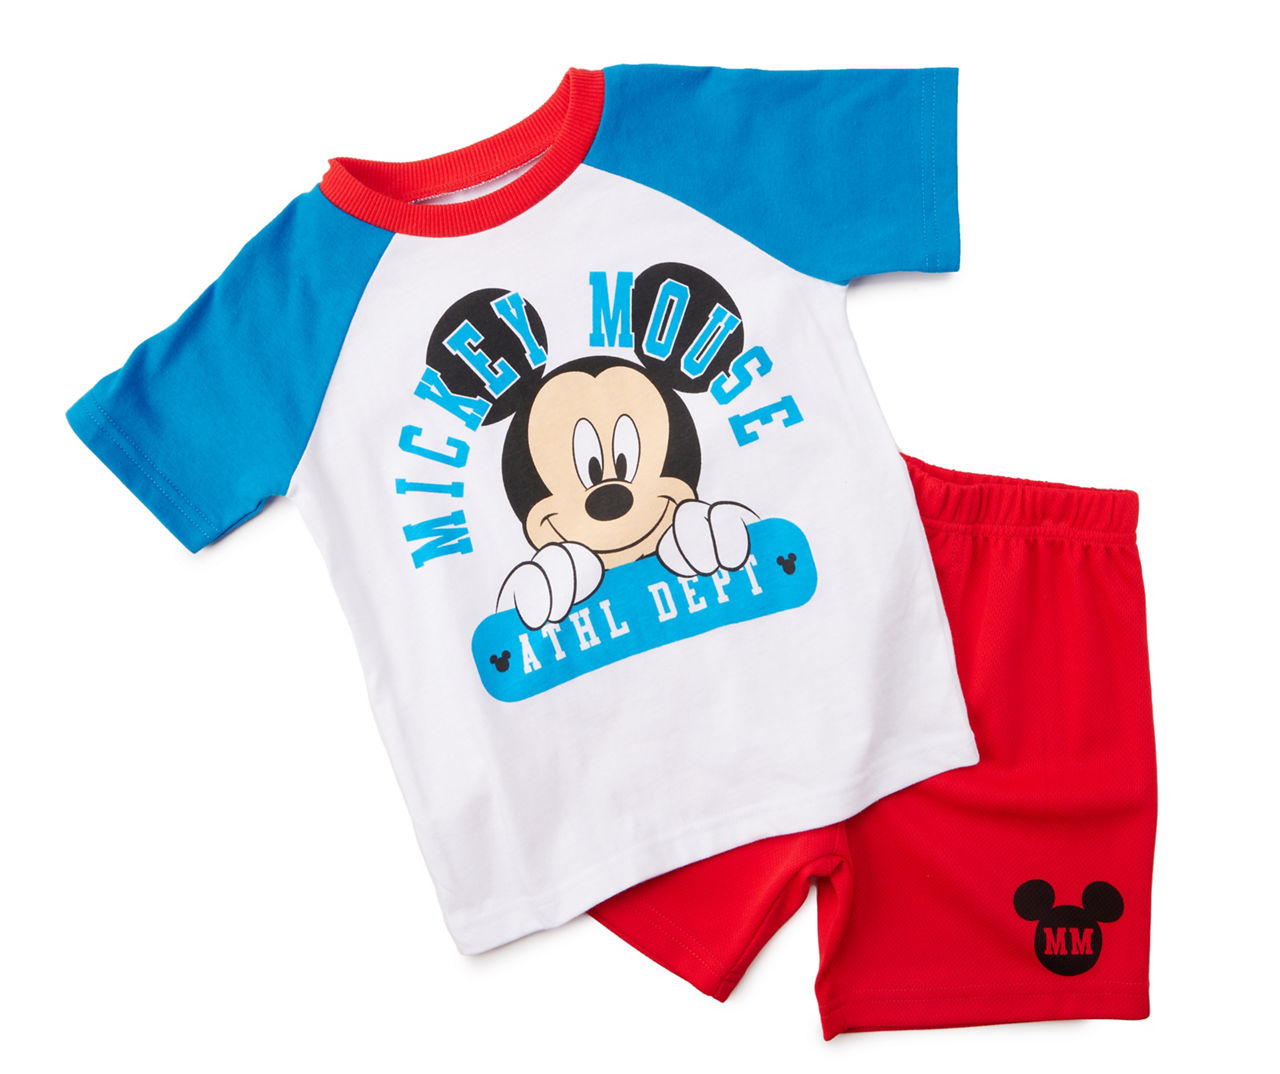 Toddler Size 5T White & Blue Mickey Mouse Tee & Red Mesh Shorts